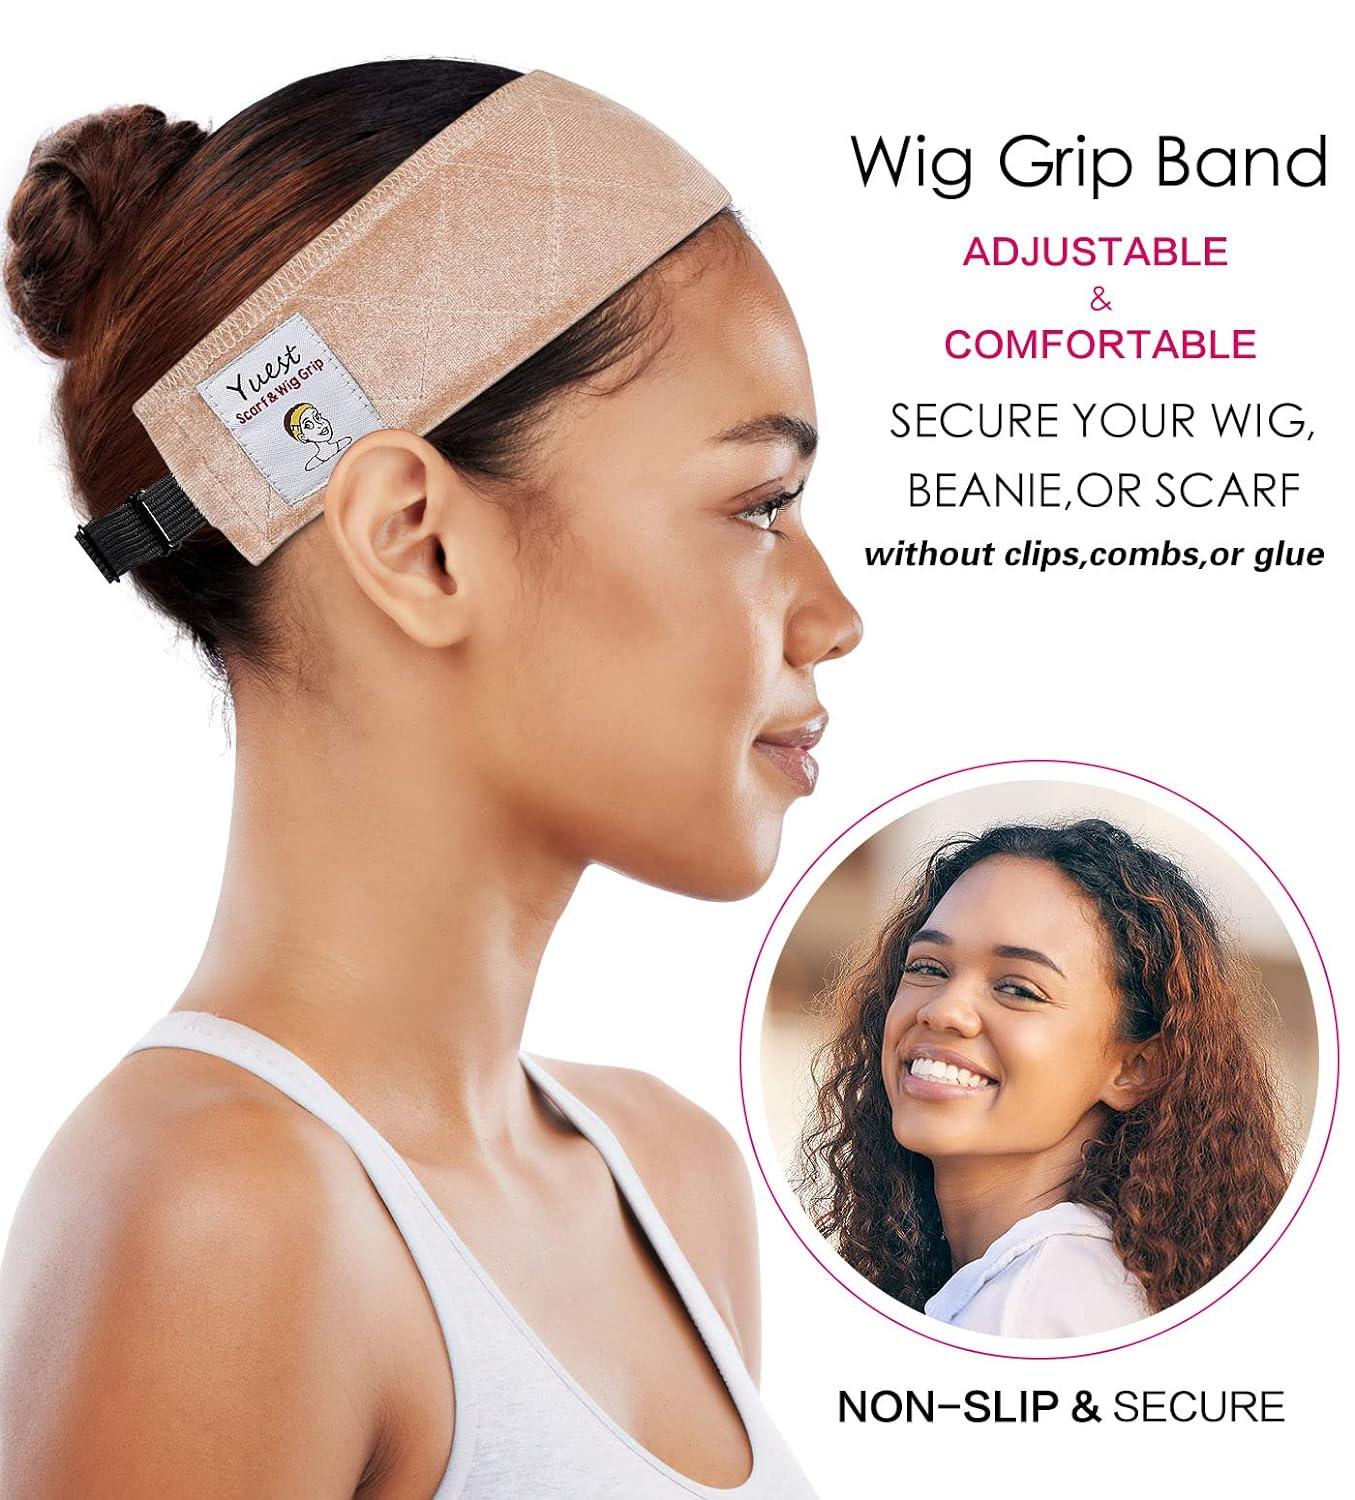 Yuest Wig Grip Band for Lace Front Wig Grip Bands for Keeping Wigs in Place  Secured Non Slip Grip Headband Wig Accessory for Women Wigs Gripper No Slip  Velvet Wig Head Grip